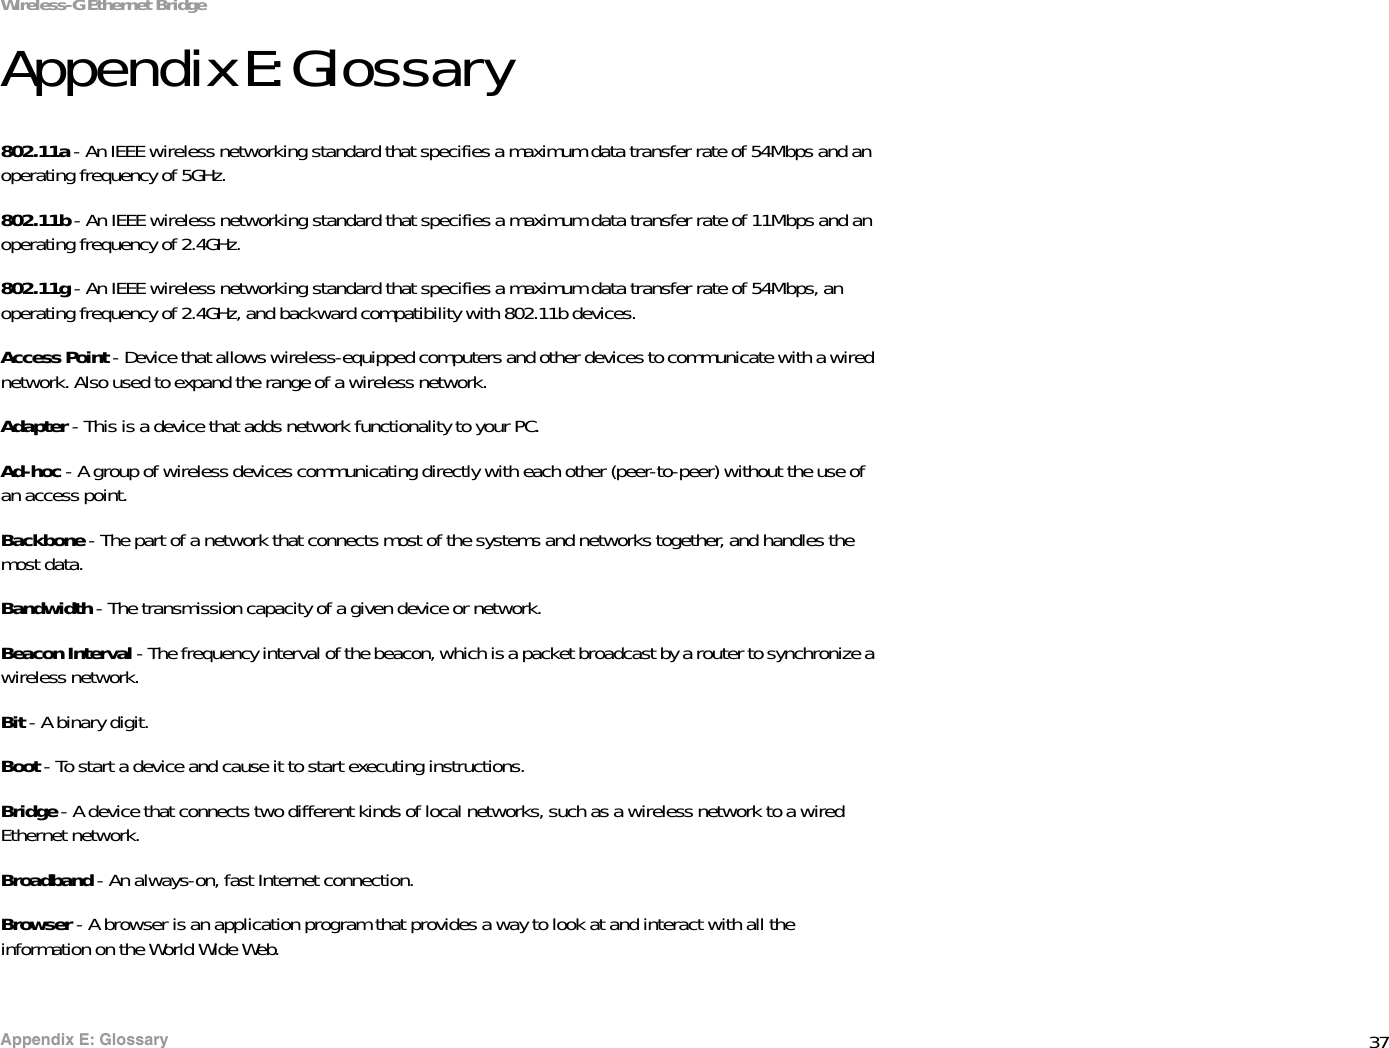 37Appendix E: GlossaryWireless-G Ethernet BridgeAppendix E: Glossary802.11a - An IEEE wireless networking standard that specifies a maximum data transfer rate of 54Mbps and an operating frequency of 5GHz. 802.11b - An IEEE wireless networking standard that specifies a maximum data transfer rate of 11Mbps and an operating frequency of 2.4GHz. 802.11g - An IEEE wireless networking standard that specifies a maximum data transfer rate of 54Mbps, an operating frequency of 2.4GHz, and backward compatibility with 802.11b devices. Access Point - Device that allows wireless-equipped computers and other devices to communicate with a wired network. Also used to expand the range of a wireless network. Adapter - This is a device that adds network functionality to your PC. Ad-hoc - A group of wireless devices communicating directly with each other (peer-to-peer) without the use of an access point. Backbone - The part of a network that connects most of the systems and networks together, and handles the most data. Bandwidth - The transmission capacity of a given device or network. Beacon Interval - The frequency interval of the beacon, which is a packet broadcast by a router to synchronize a wireless network. Bit - A binary digit. Boot - To start a device and cause it to start executing instructions. Bridge - A device that connects two different kinds of local networks, such as a wireless network to a wired Ethernet network. Broadband - An always-on, fast Internet connection. Browser - A browser is an application program that provides a way to look at and interact with all the information on the World Wide Web. 